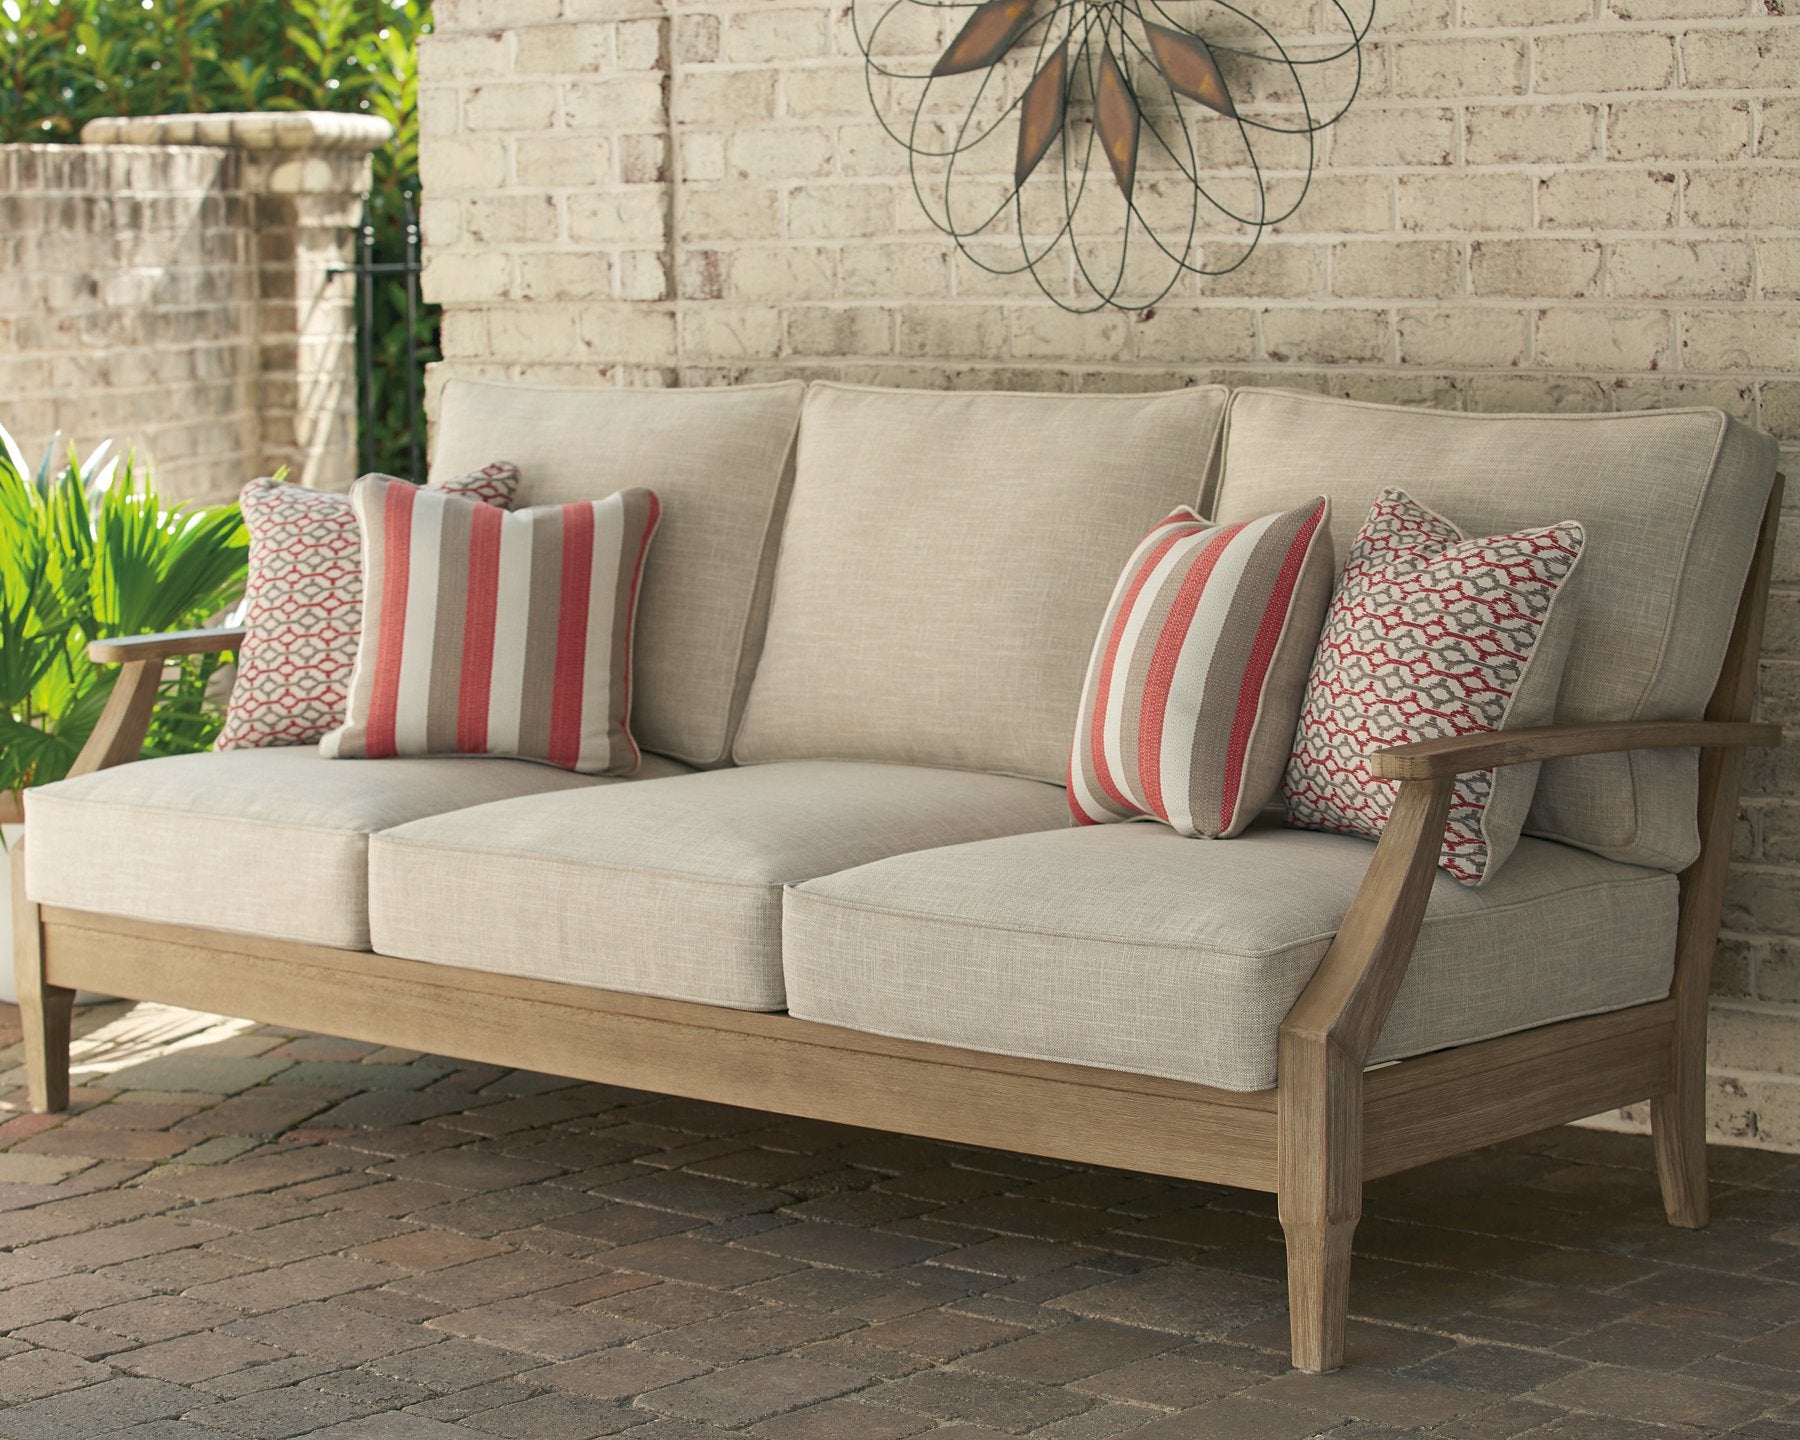 Clare View Outdoor Seating Set - Half Price Furniture